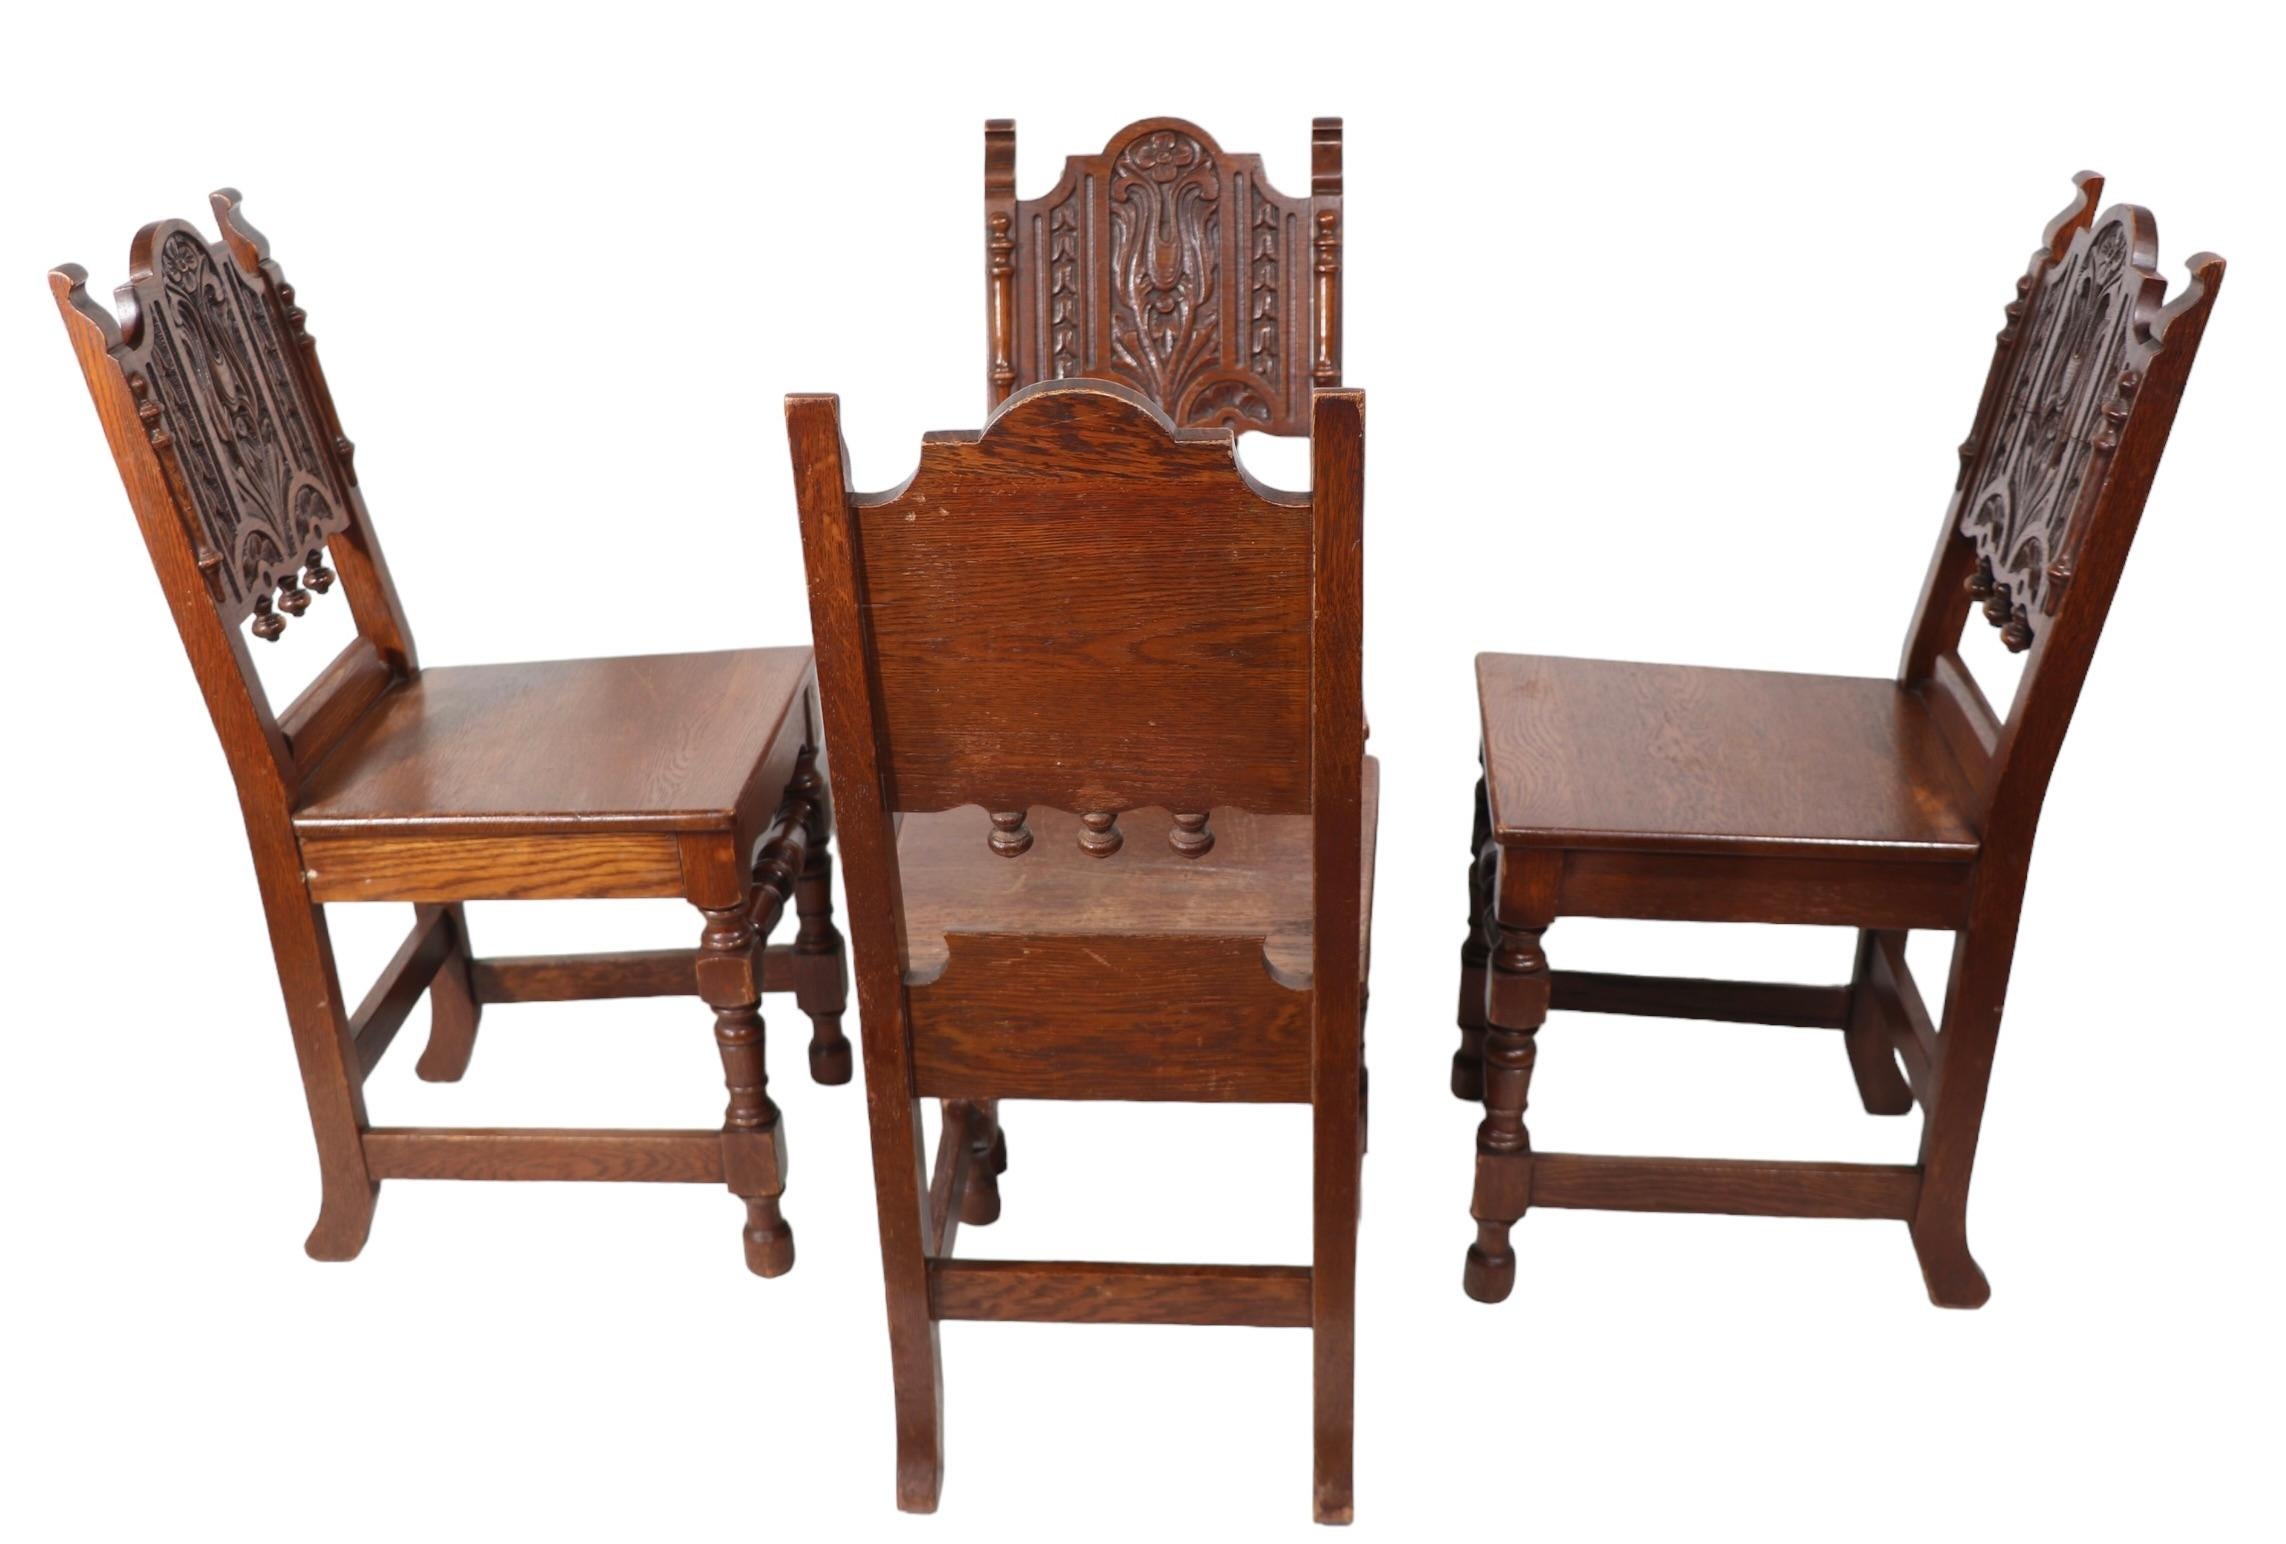 20th Century Set of Four English Carved Oak Cafe Dining Chairs in the Jacobean Style c 1920's For Sale